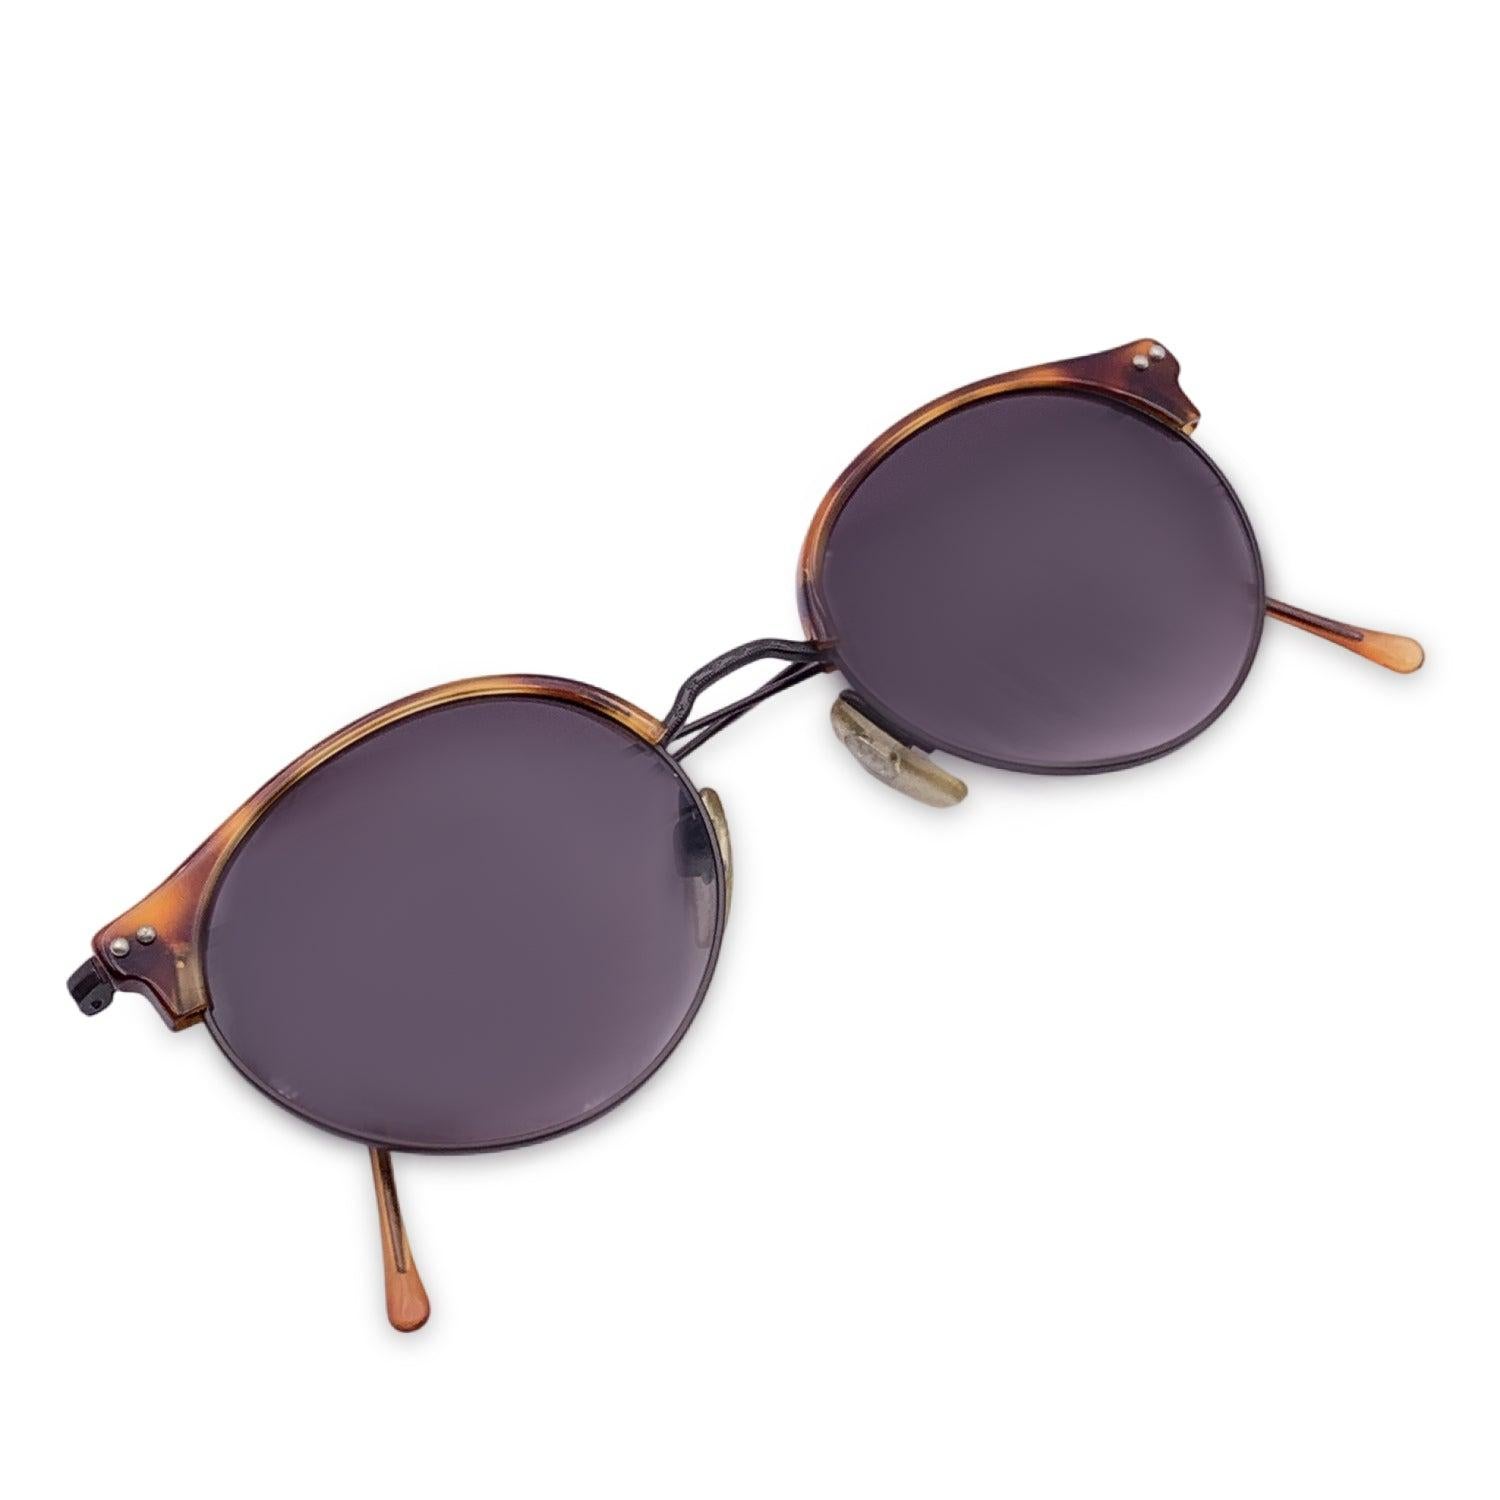 Vintage Giorgio Armani Brown sunglasses. Model. 377 col. 015. Size: 47/20 140mm. Dark brown metal frame, with brown tortoise acetate detail on the upper frame. 100% Total UVA/UVB protection .Gradient Brown lenses. Details MATERIAL: Metal COLOR: